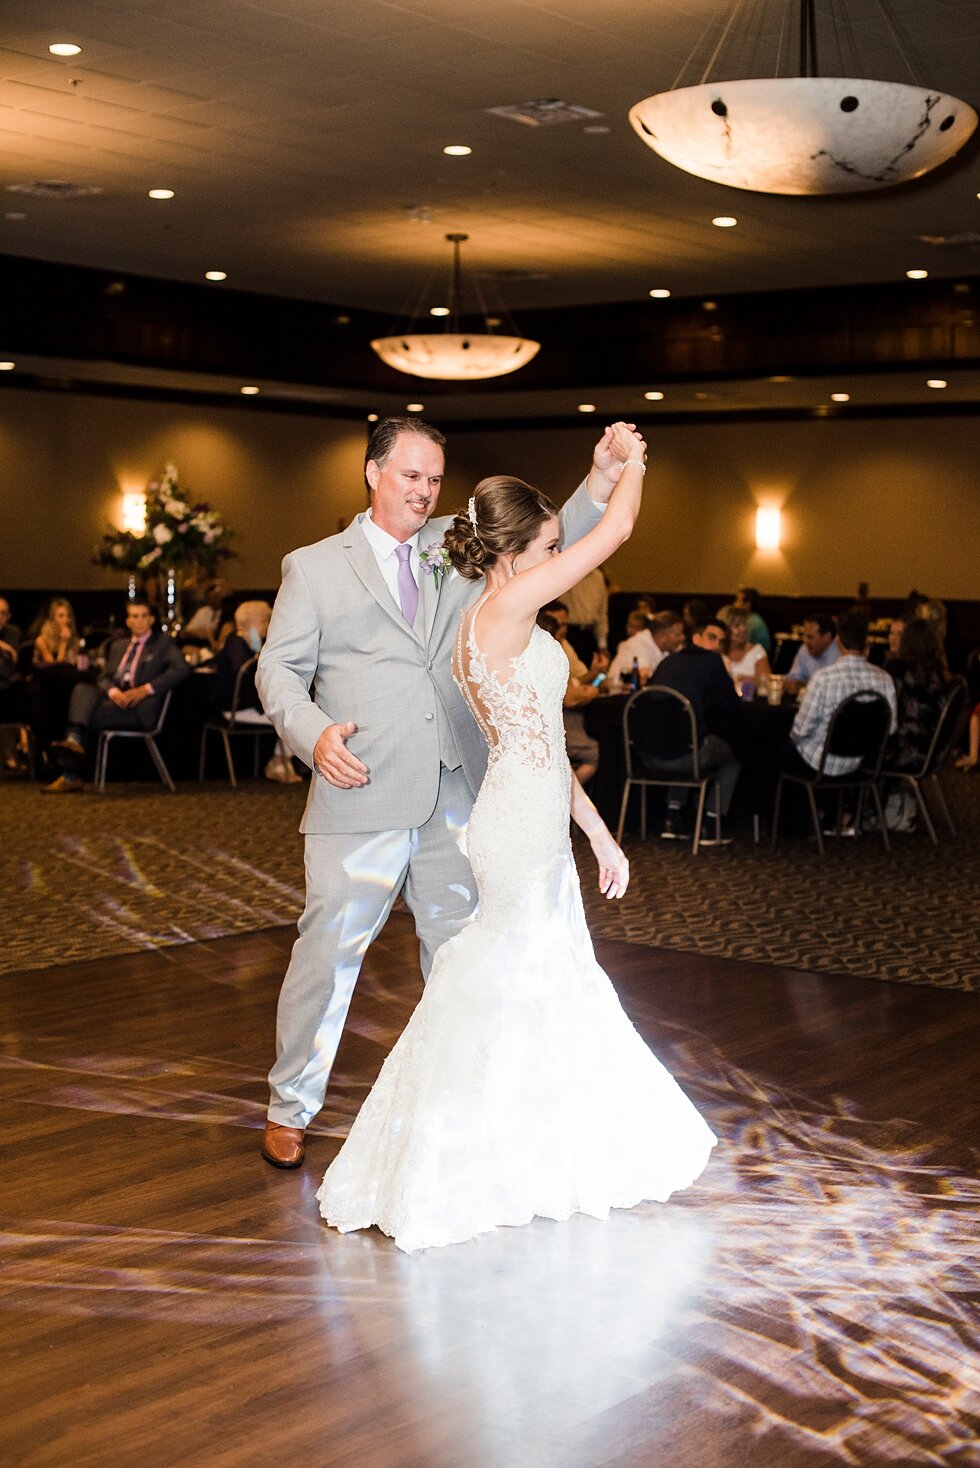  Bride spinning on the dance floor with her father during their first dance. wedding ceremony details stunning photography married midwest louisville kentucky #weddingphoto #love #justmarried #midwestphotographer #kywedding #louisville #kentuckyweddi